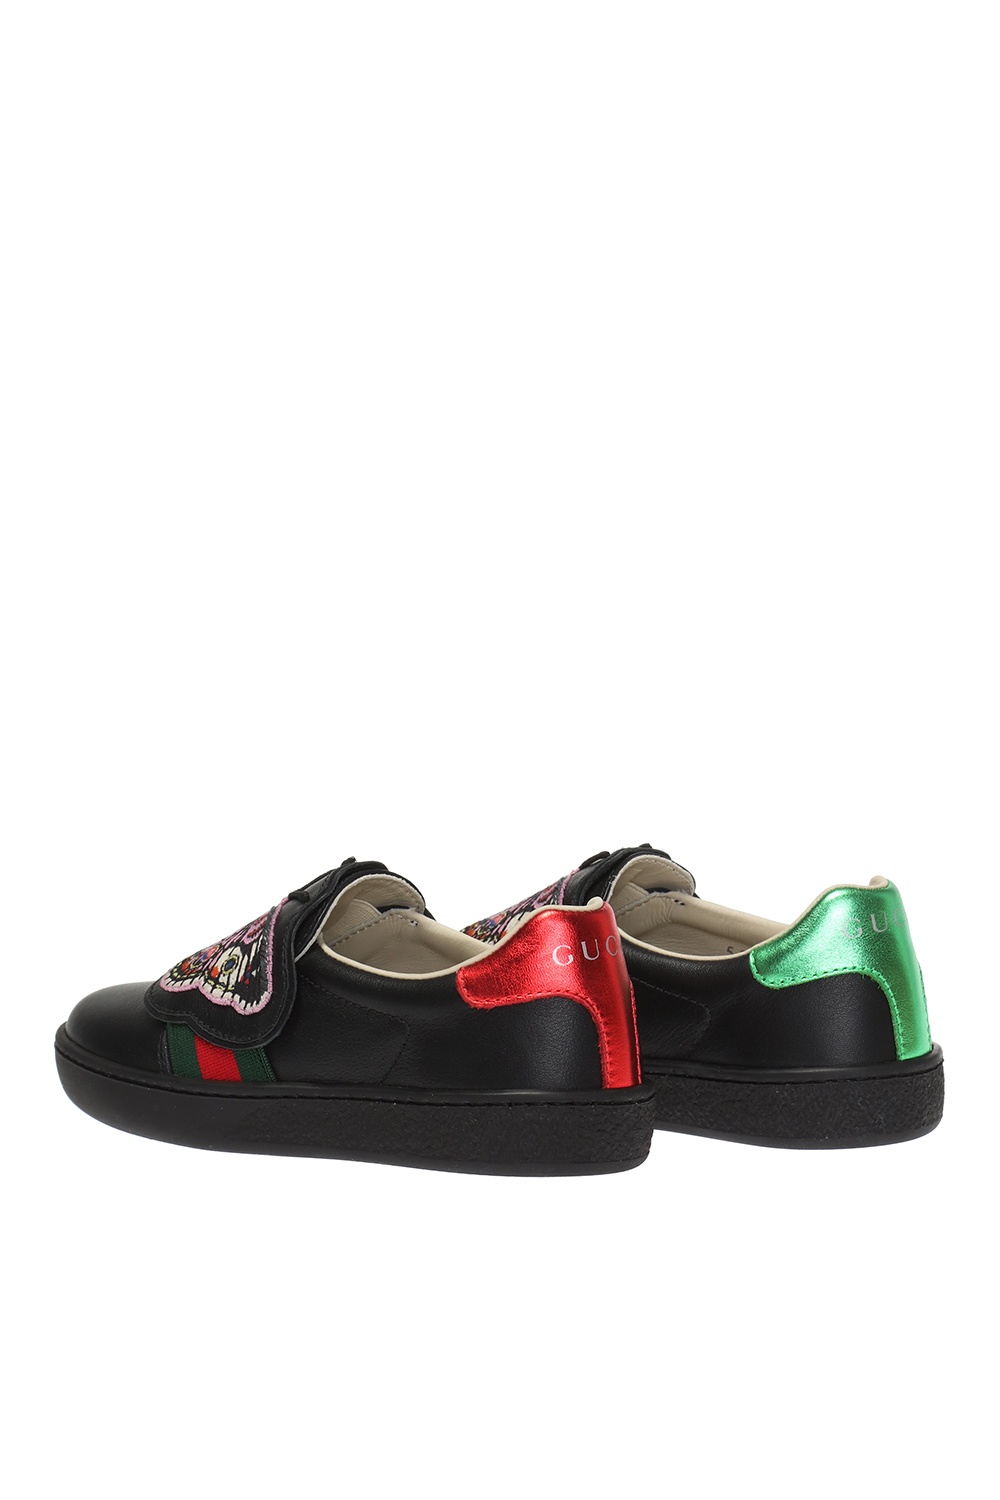 gucci sneakers butterfly